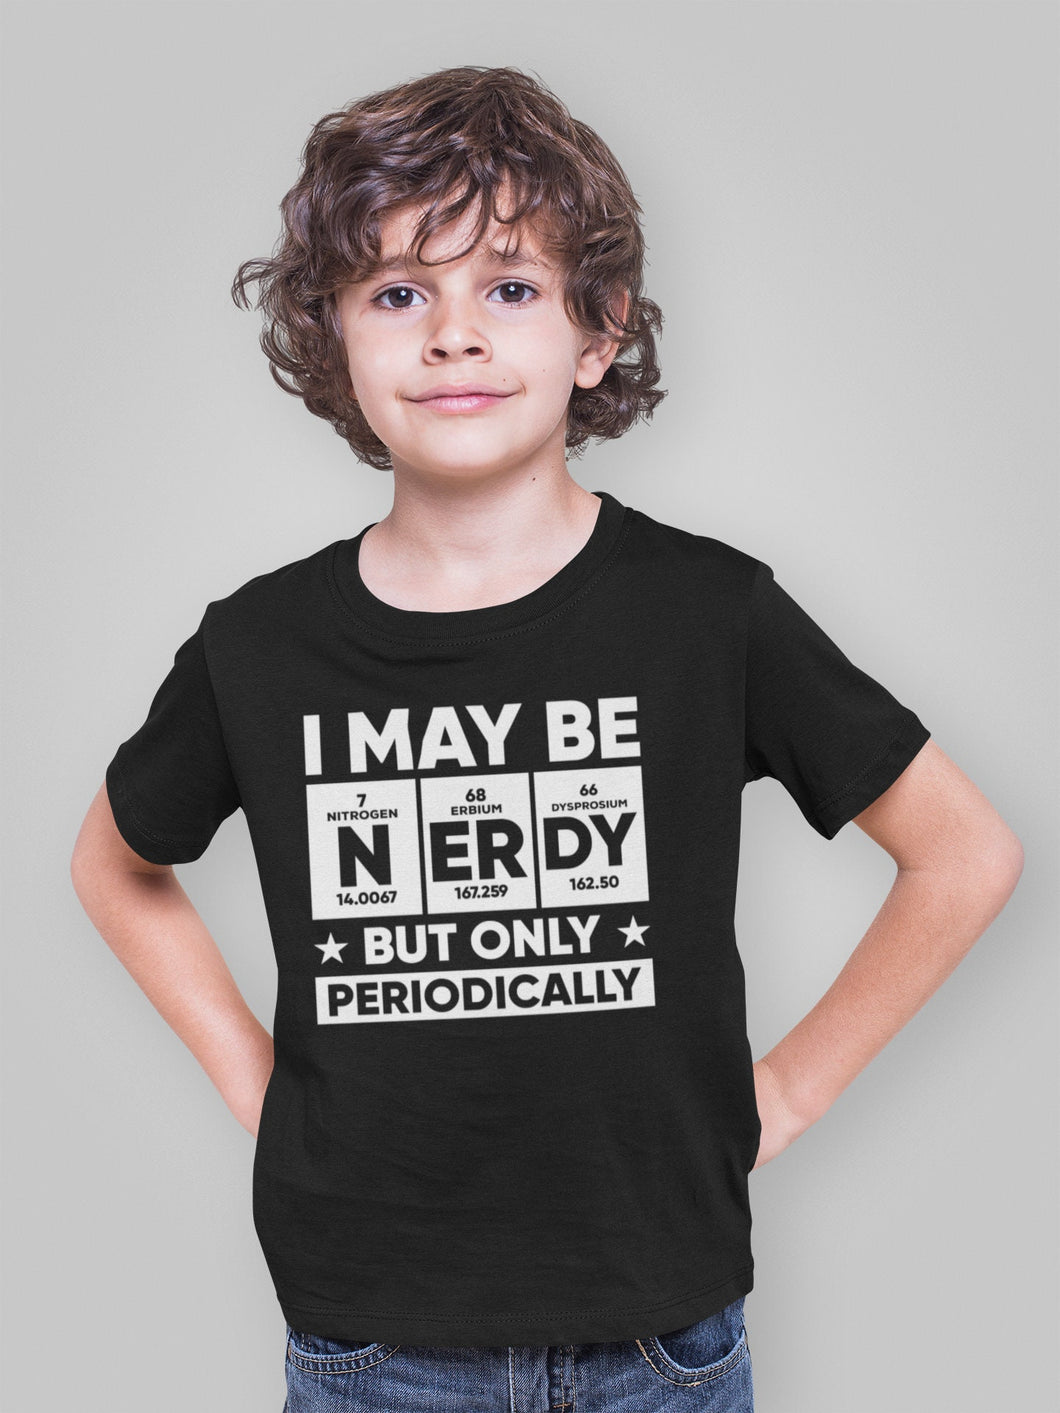 I May Be Nerdy But Only Periodically Shirt, Nerdy Geek Science, Periodically Chemistry Shirt, Science